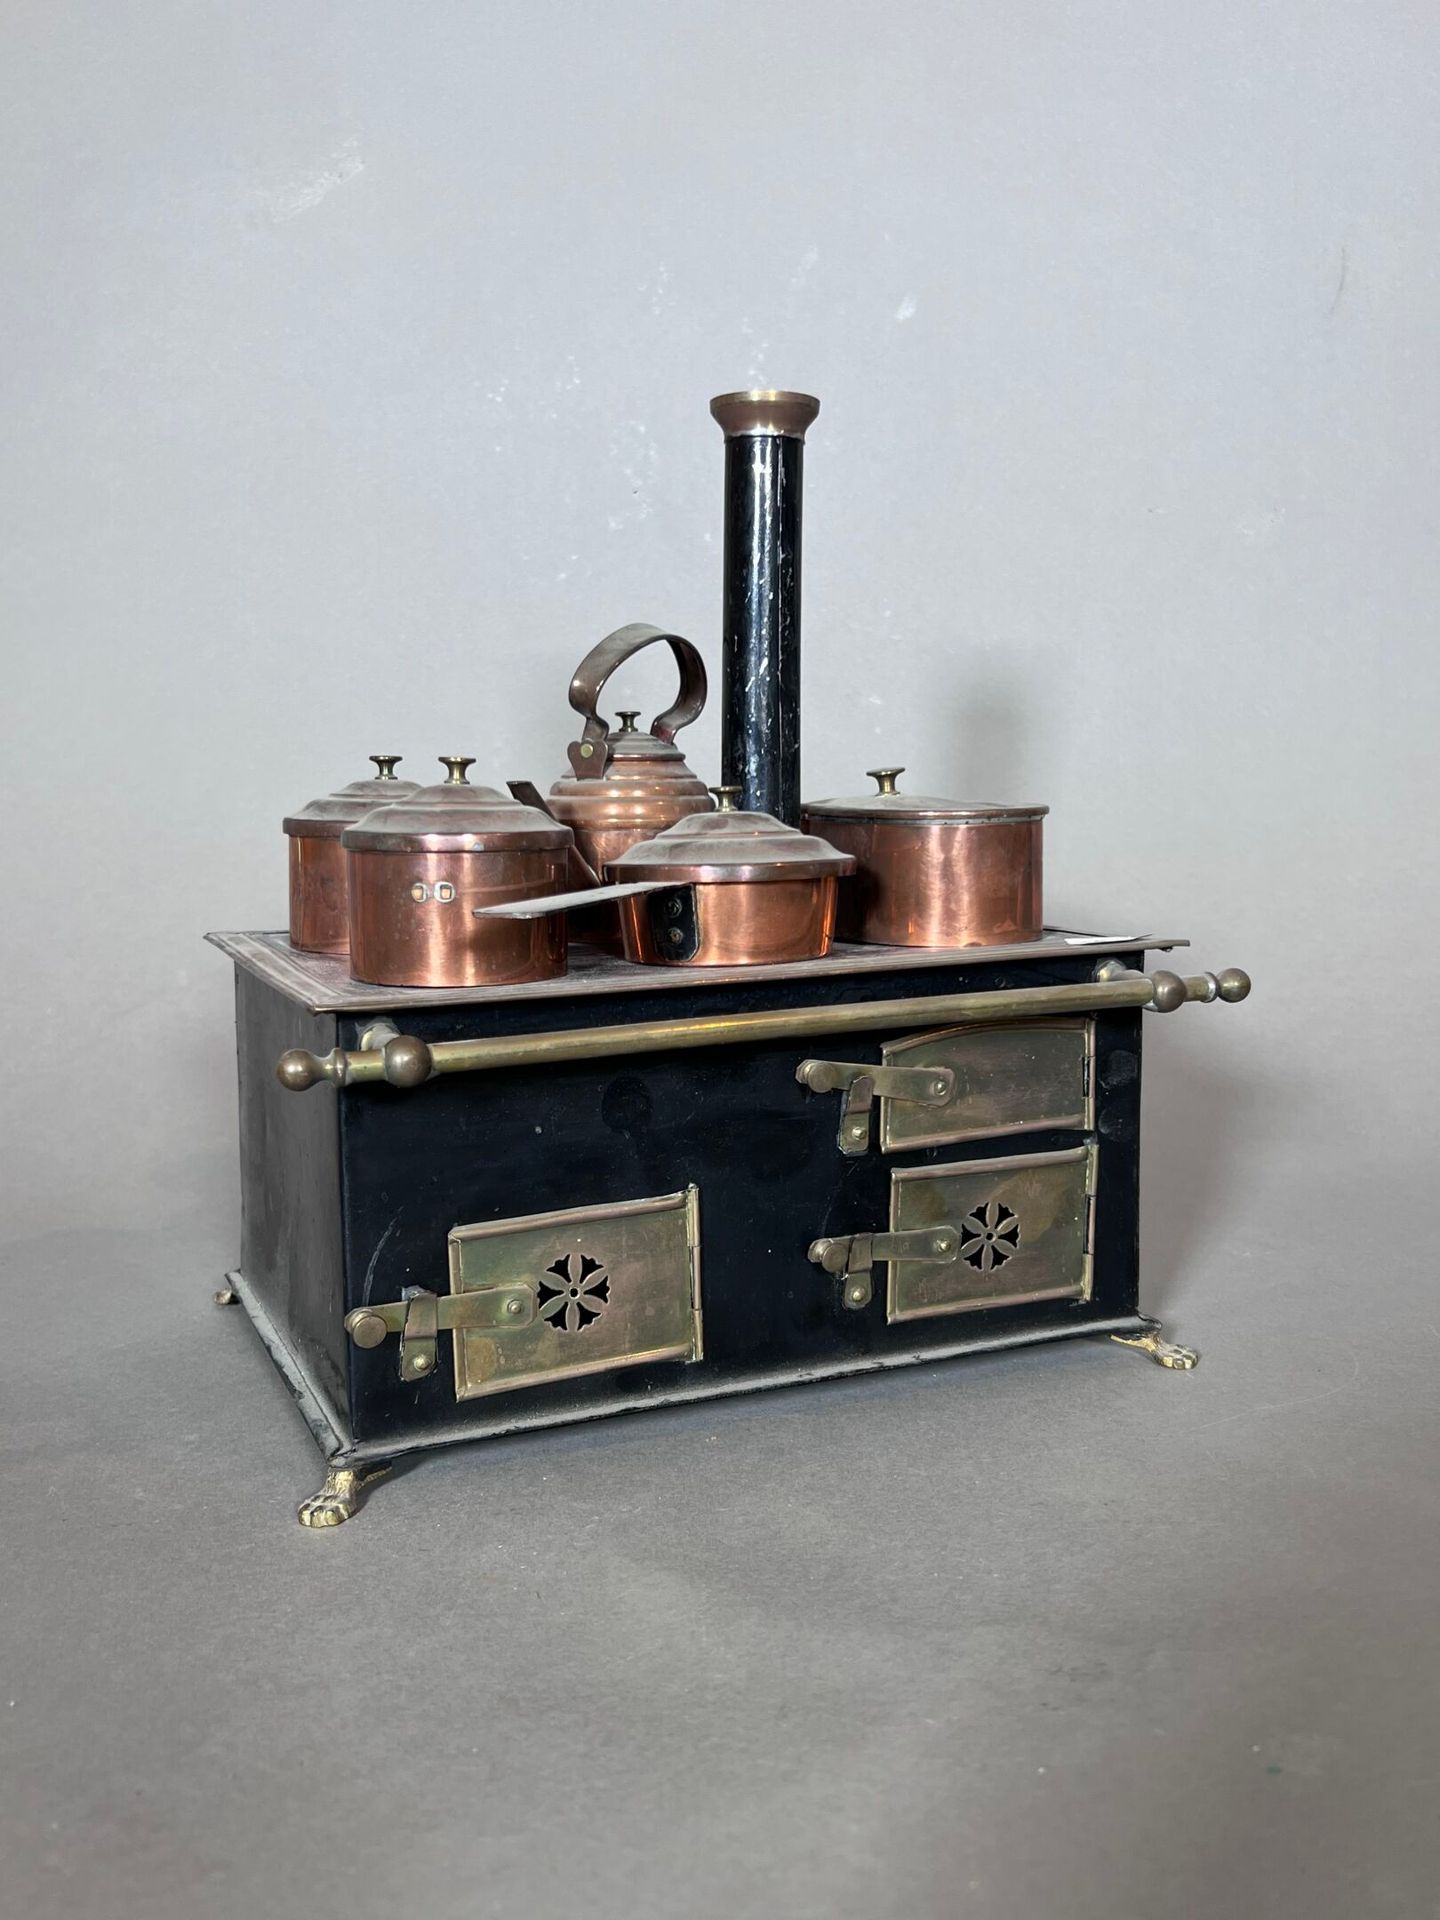 Null Set of 4 stoves including :
- a sheet metal and brass galley stove, 1900 pe&hellip;